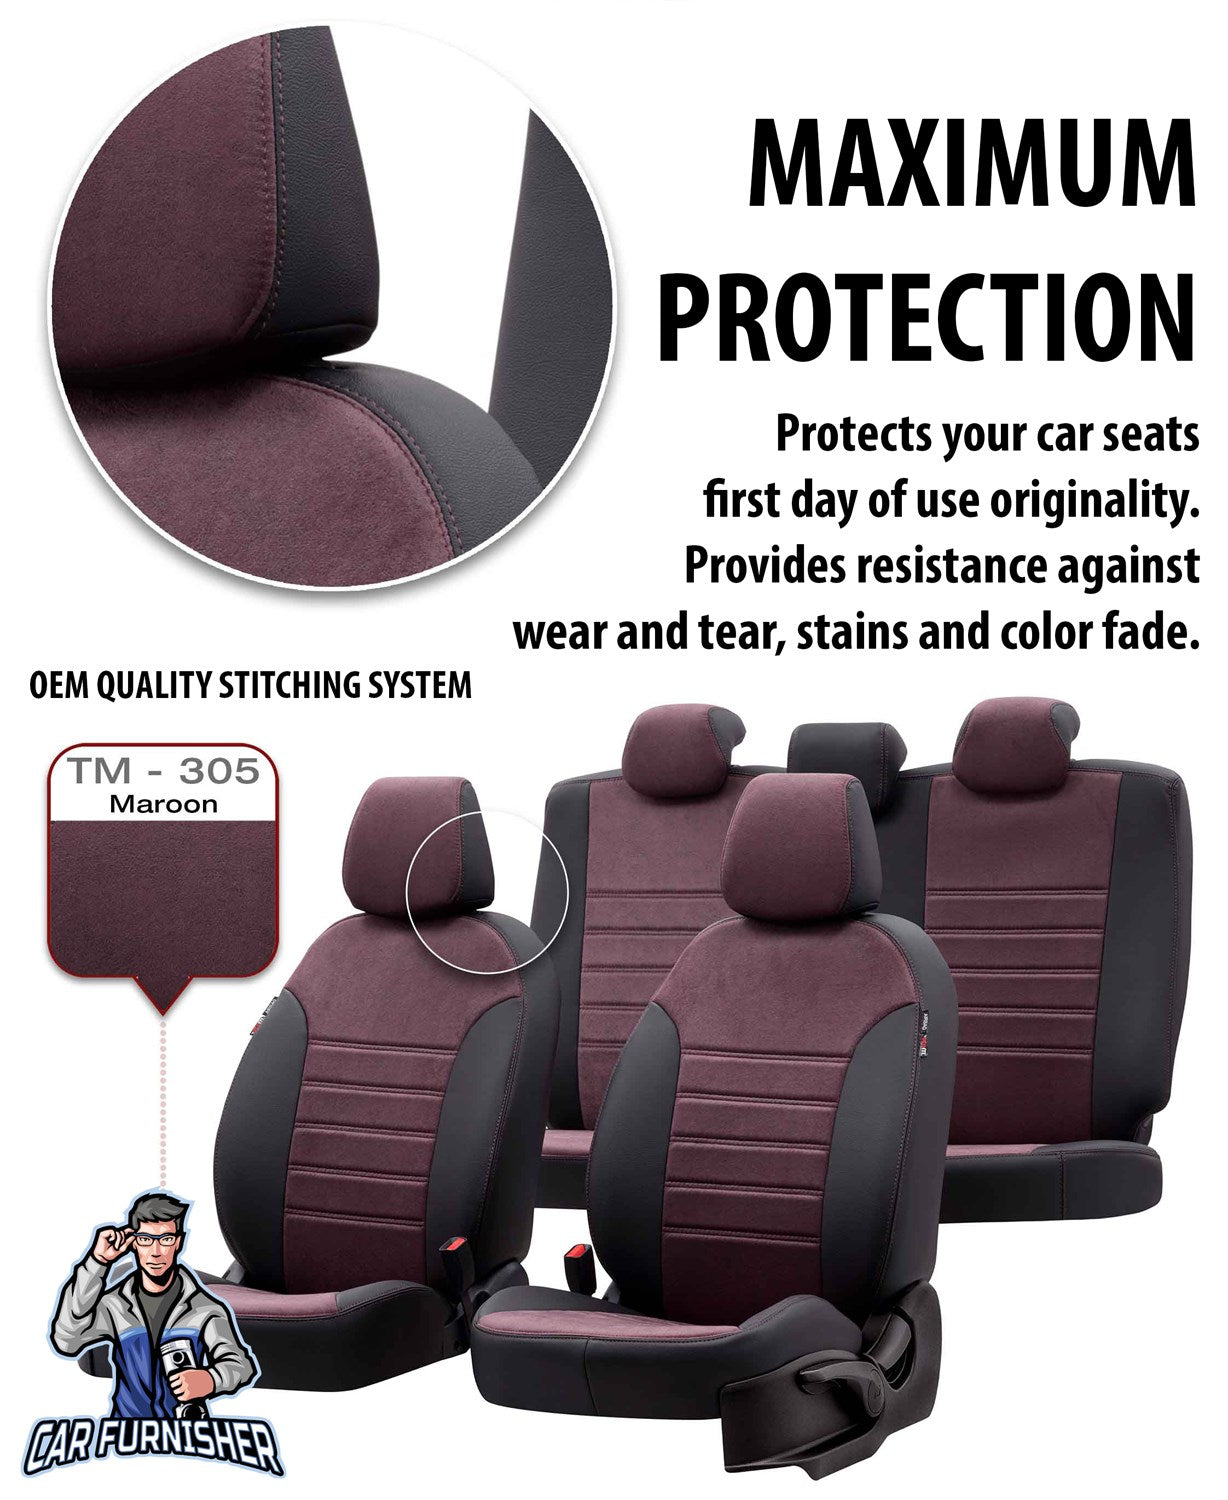 Nissan Pulsar Seat Covers Milano Suede Design Smoked Leather & Suede Fabric